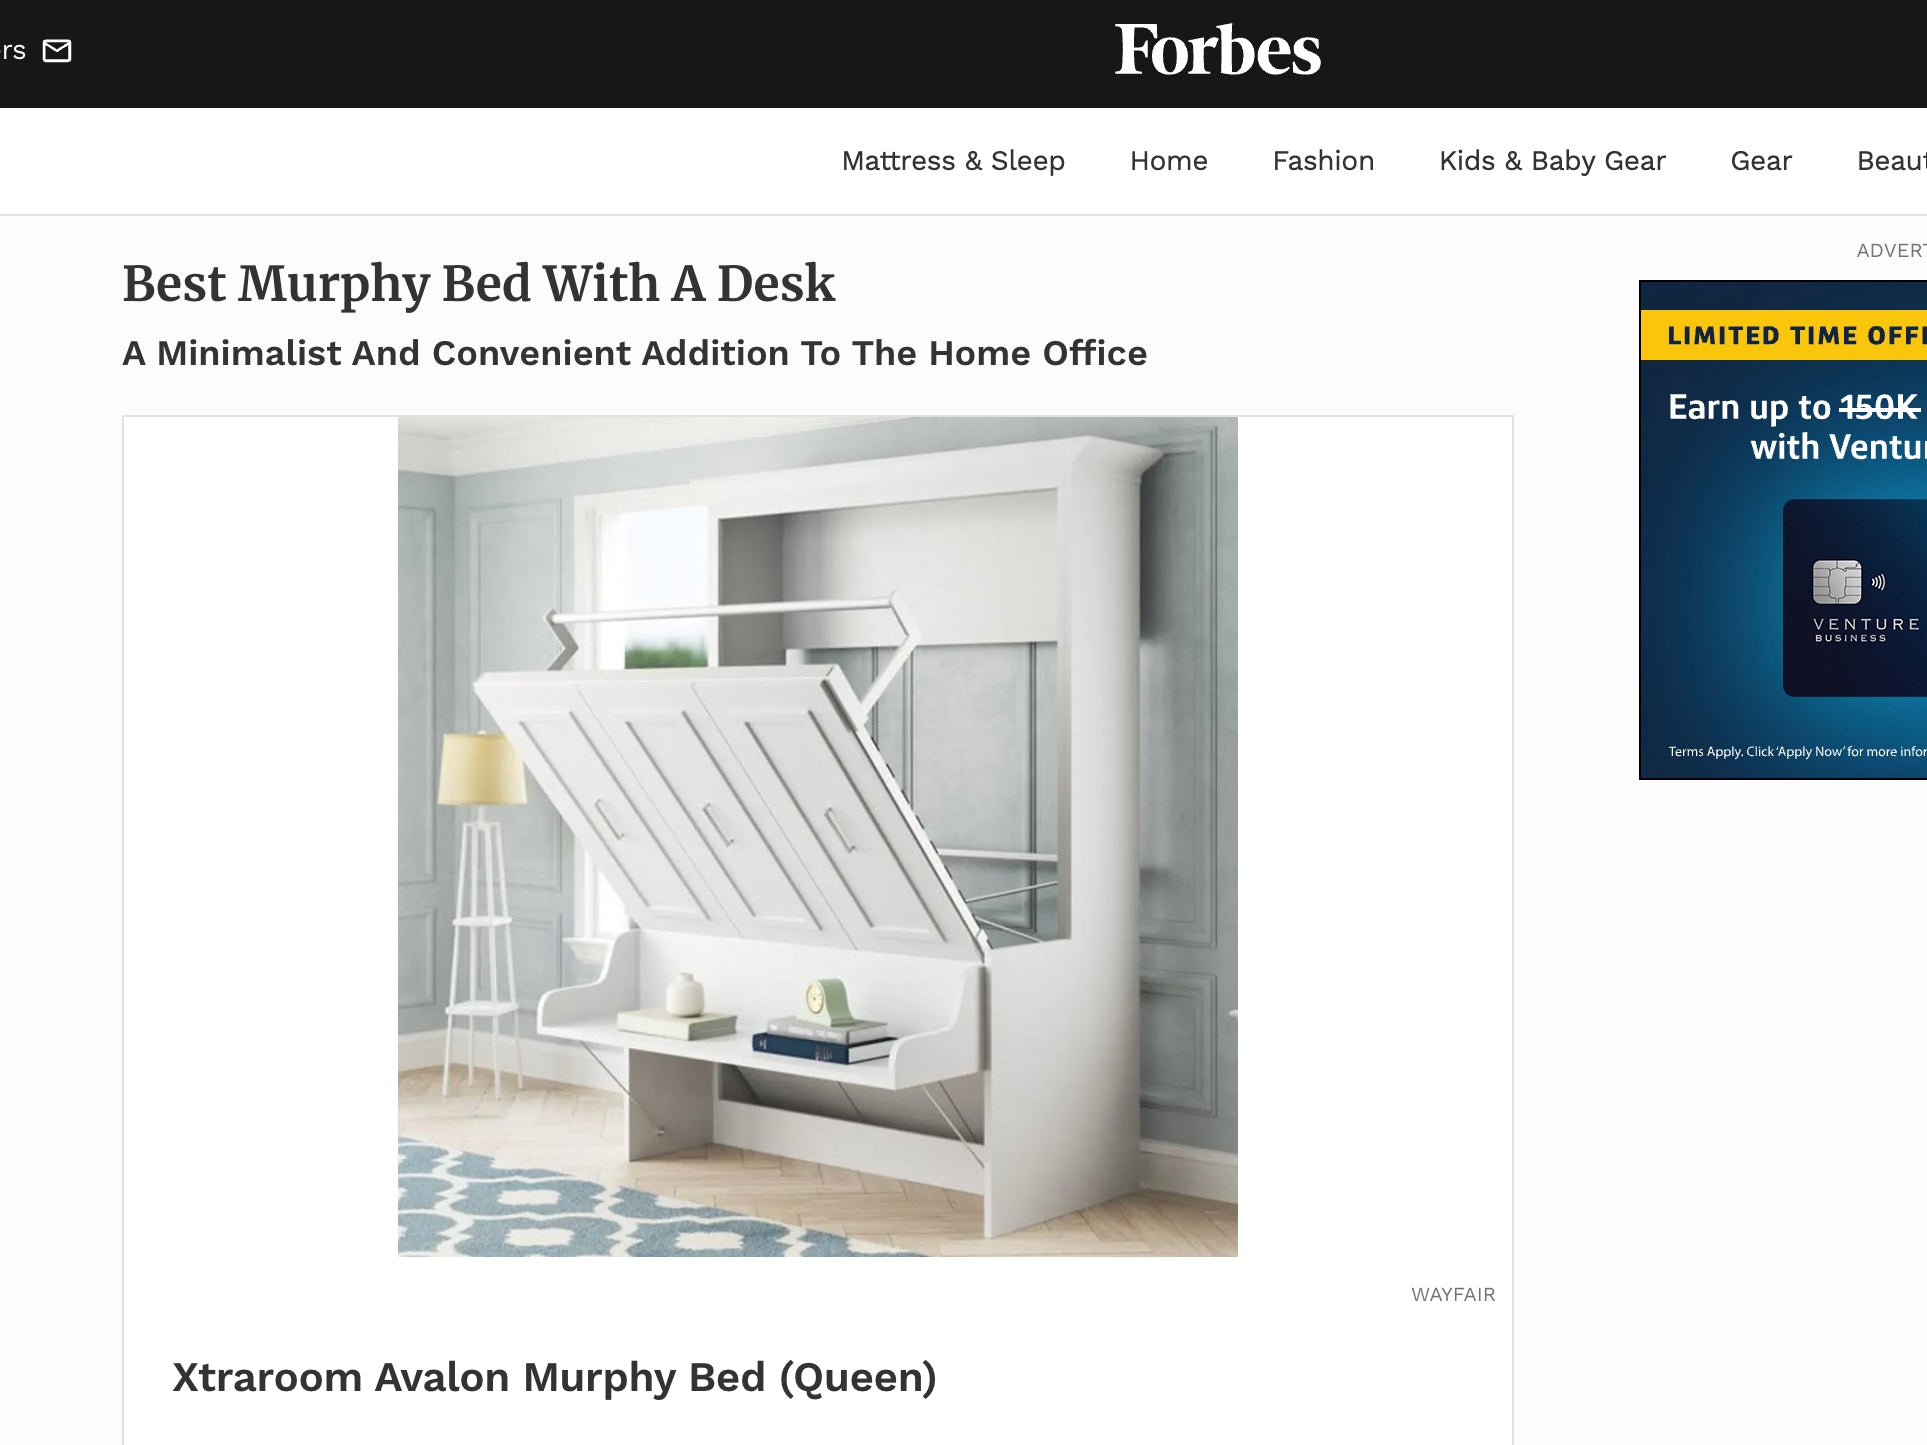 Selected by FORBES: Best Murphy Bed with Desk